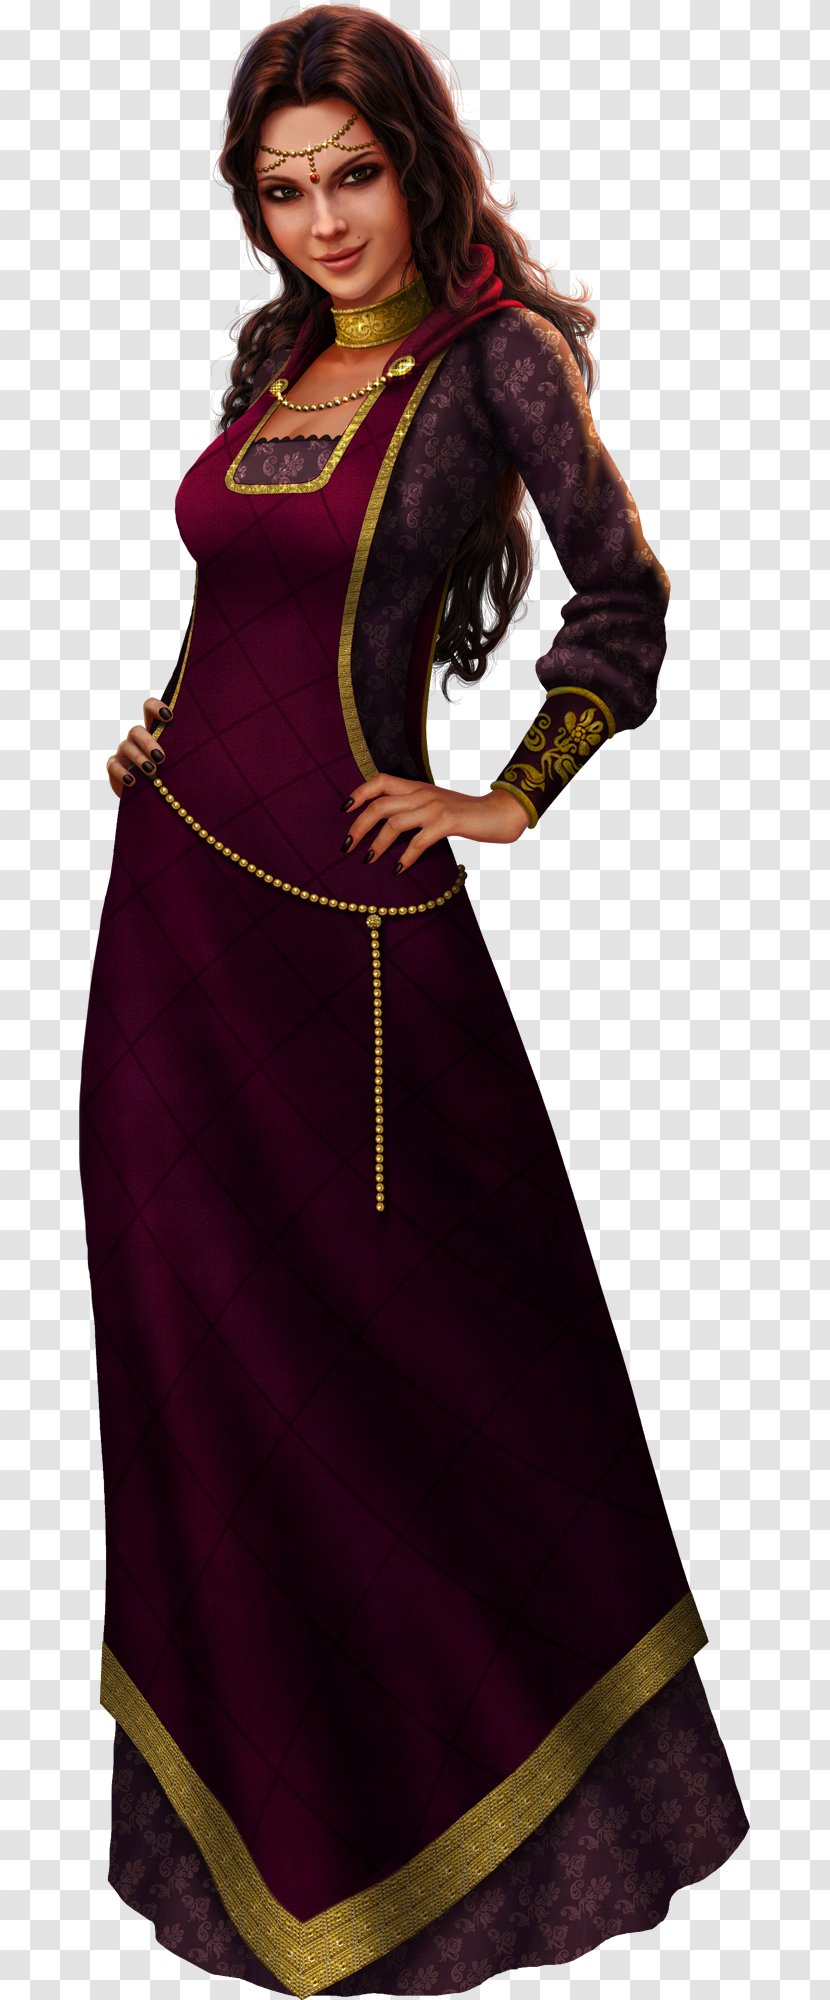 The Sims Medieval: Pirates And Nobles 3 4 2 Middle Ages - Costume Design - Medieval Clothes Transparent PNG